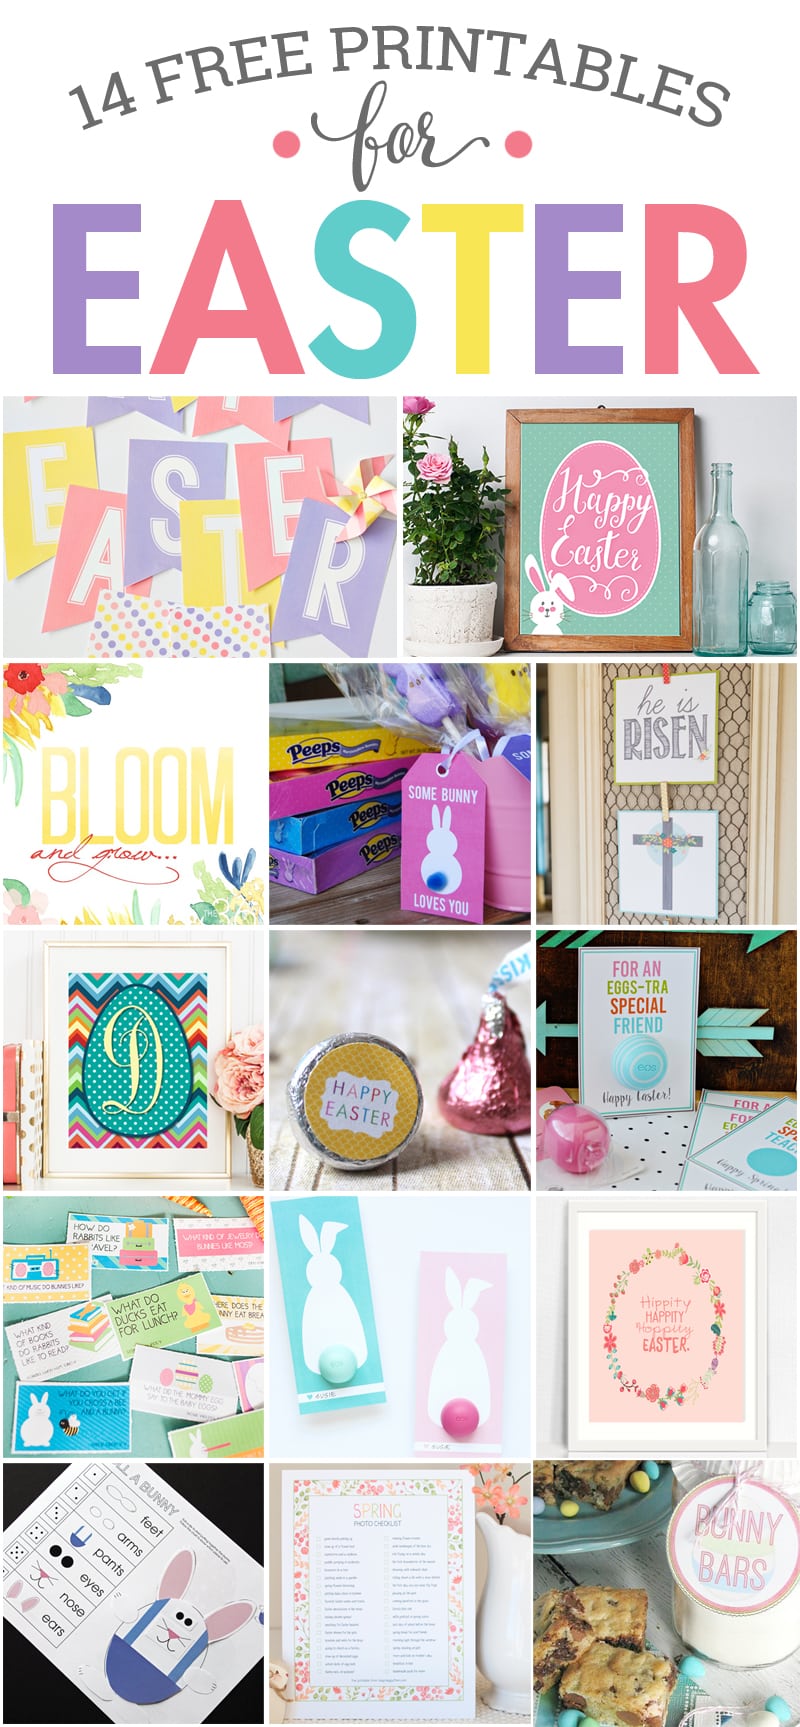 14_Free_Printables_for_Easter